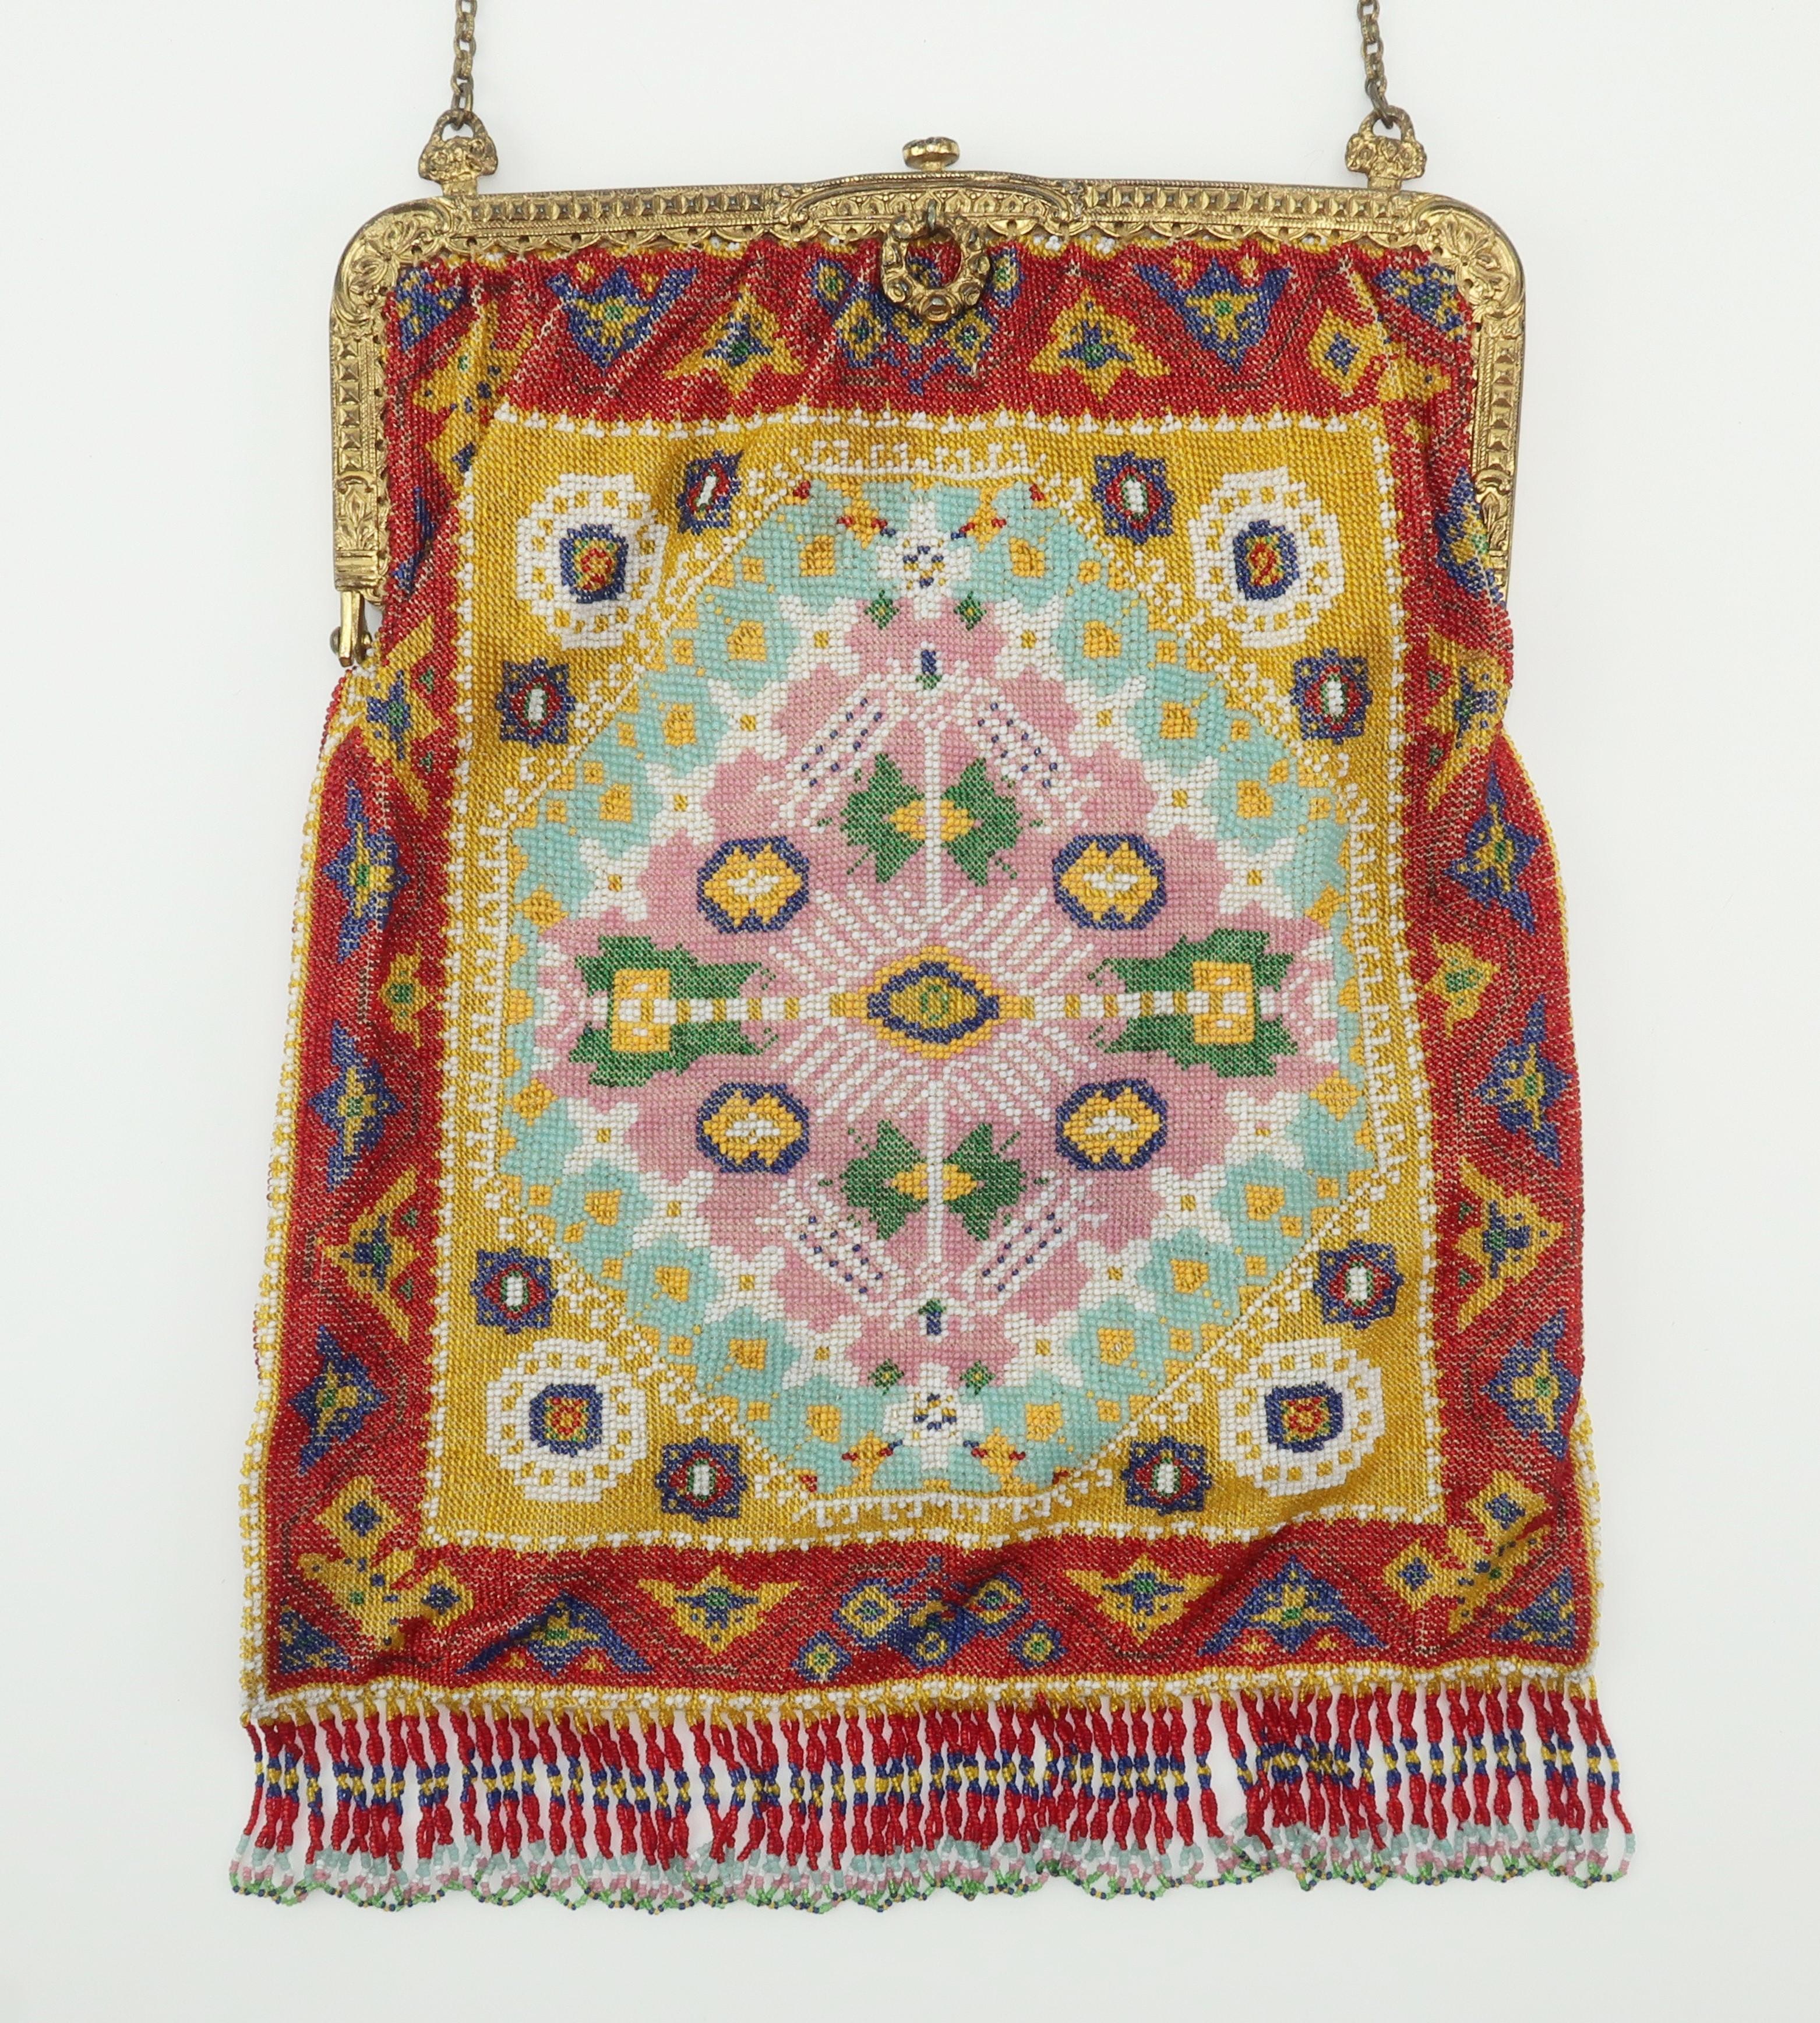 Micro beaded handbags from the 1800’s and early 1900’s are amazing examples of a handmade art form that are as beautiful to look at as they are to carry.  This rather large example displays the colorful image of an exotic rug complete with looped